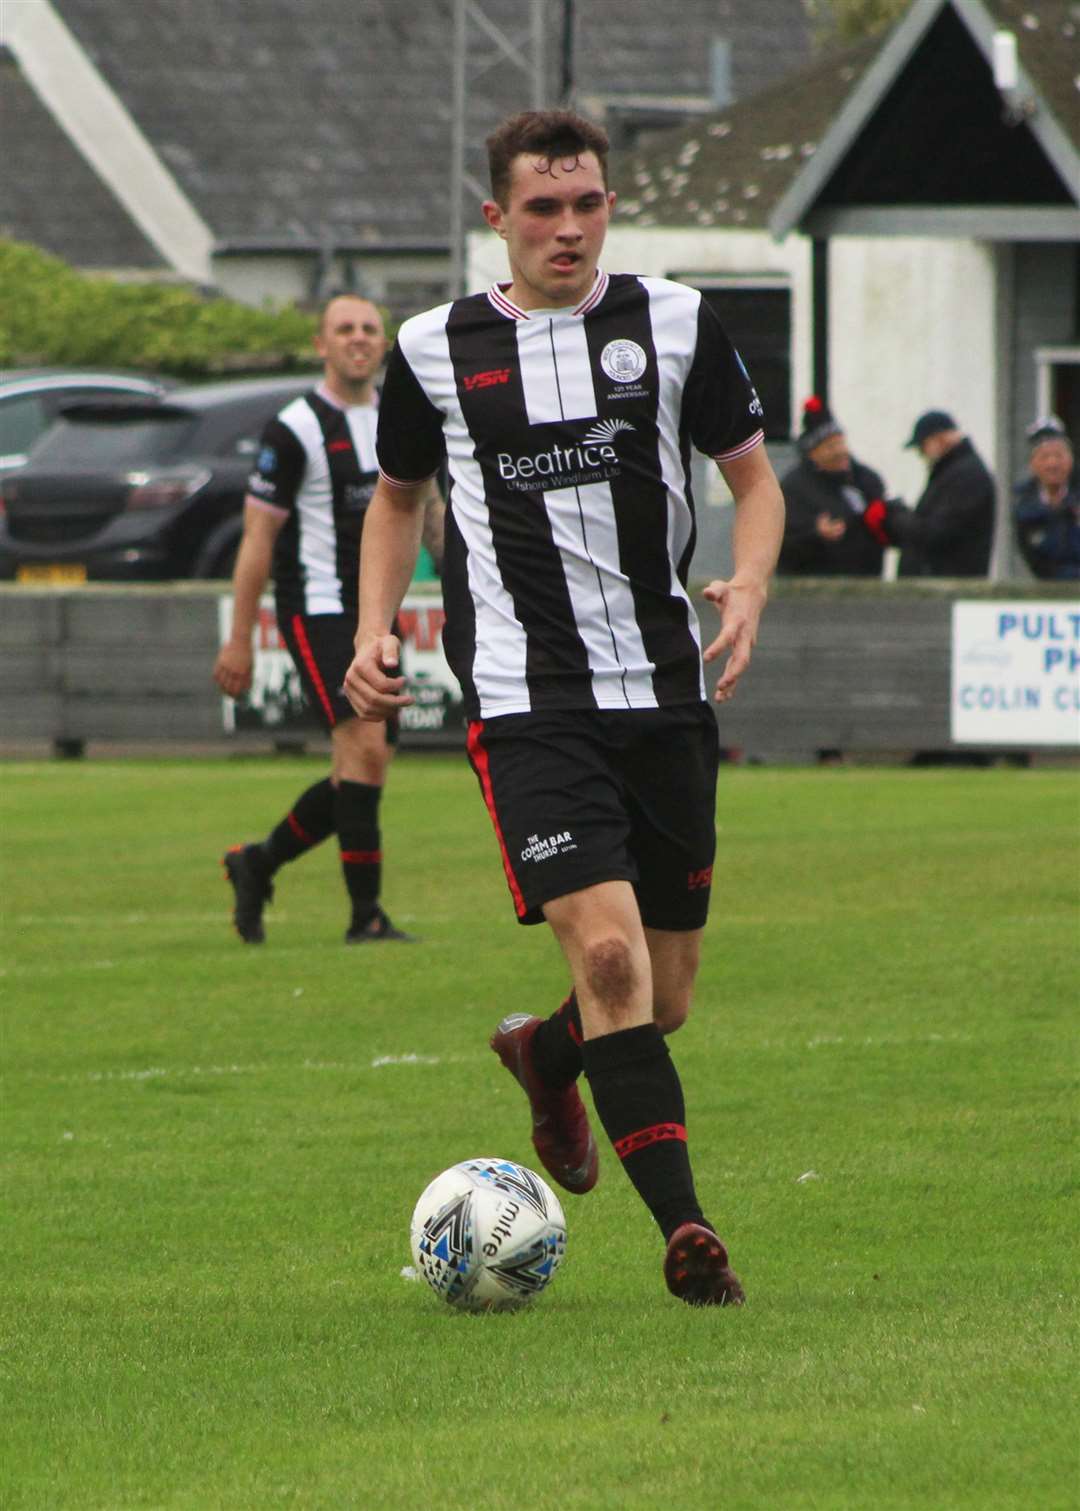 Ben Sinclair, one of the newcomers to the side, takes the ball forward for Academy.